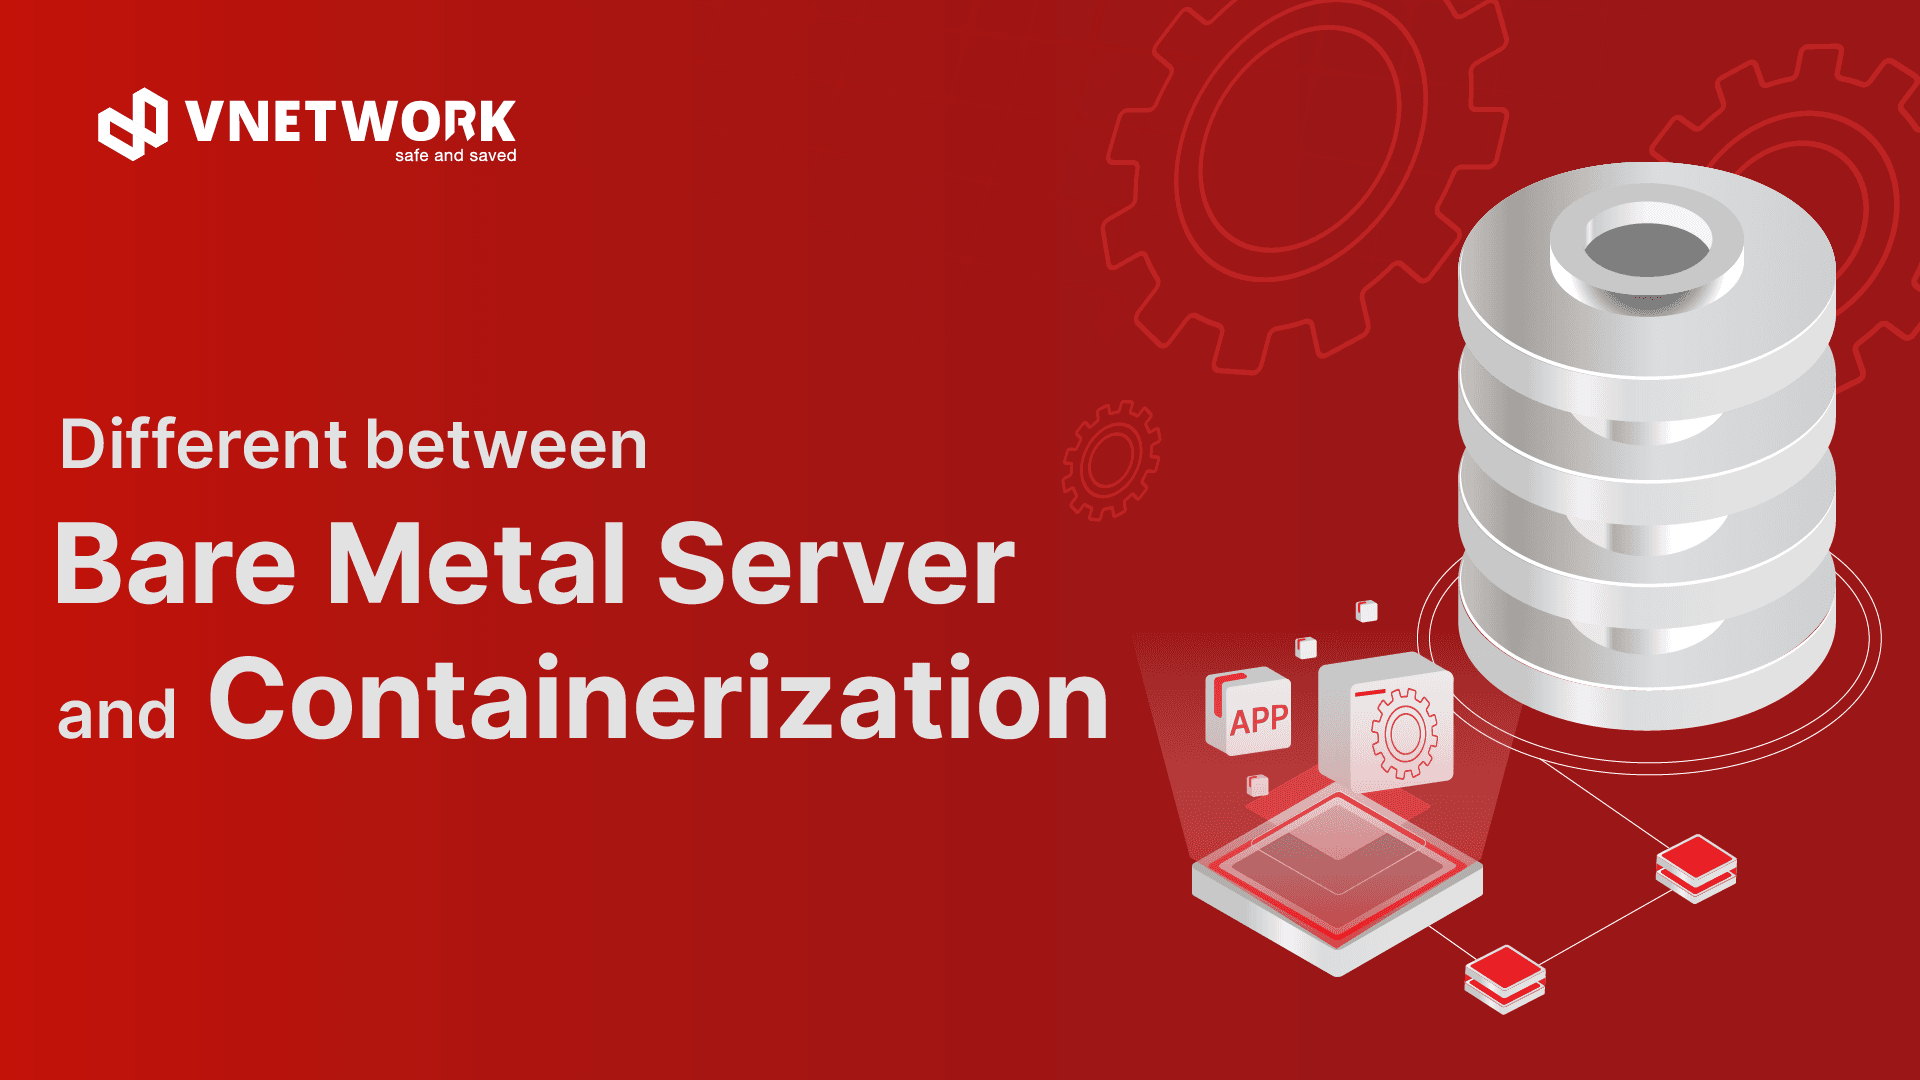 Bare metal servers vs containerization: Which is better?